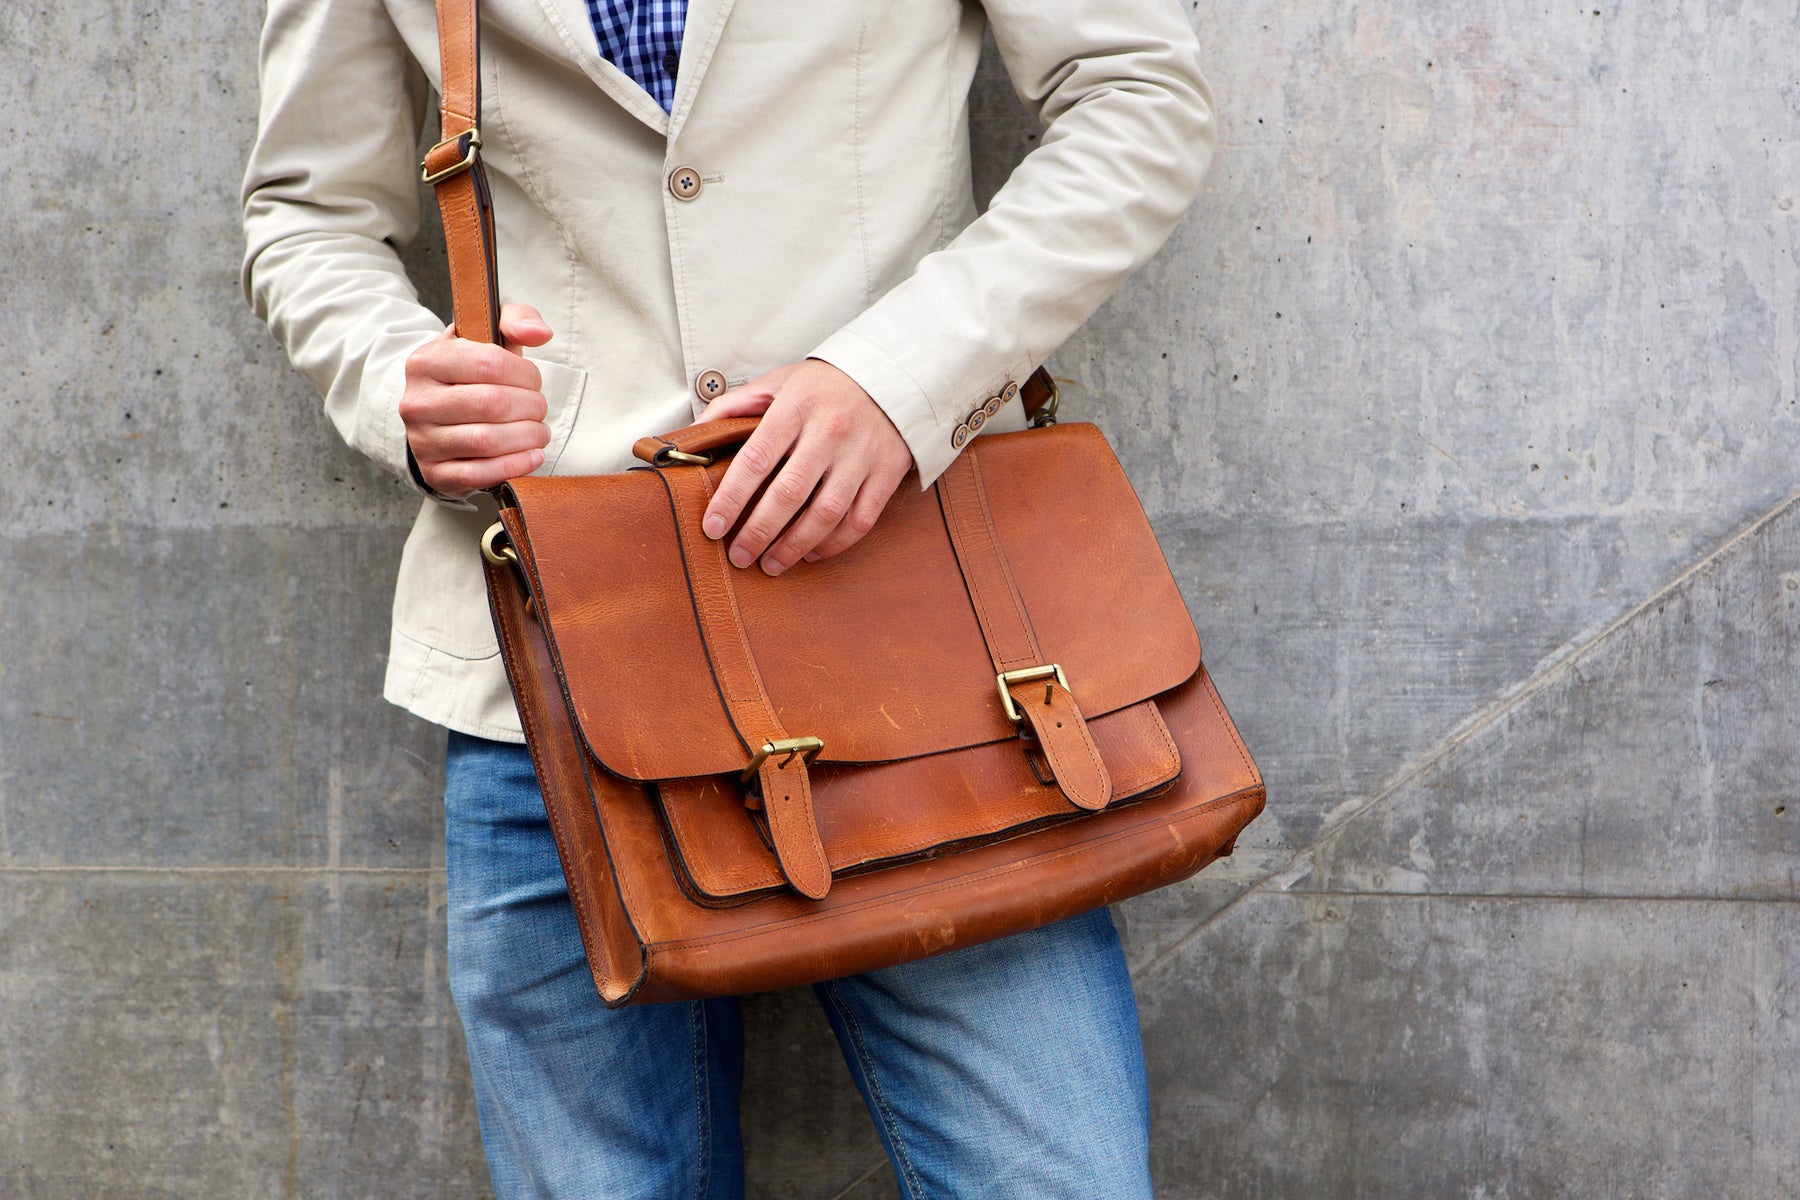 Things To Look For When Buying a Leather Messenger